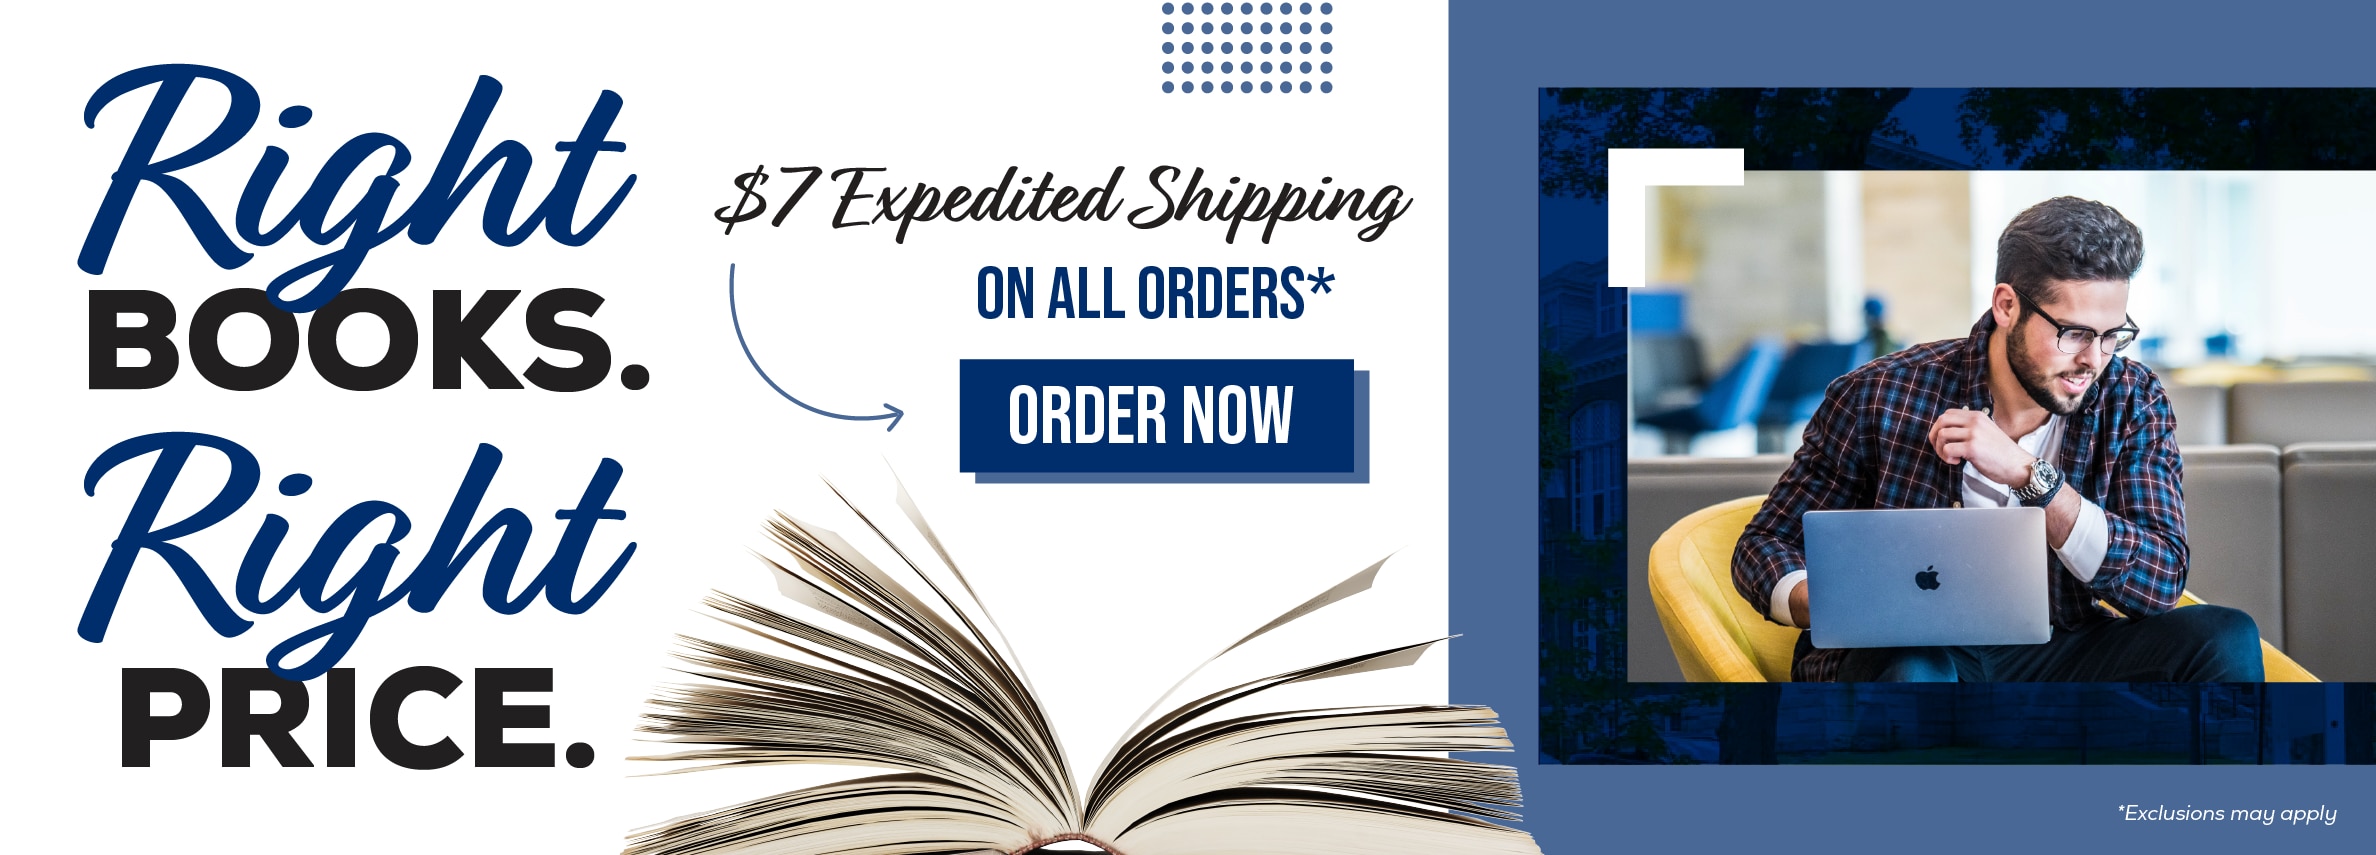 Right books. Right price. $7 expedited shipping on all orders.* Order now. *Exclusions may apply.